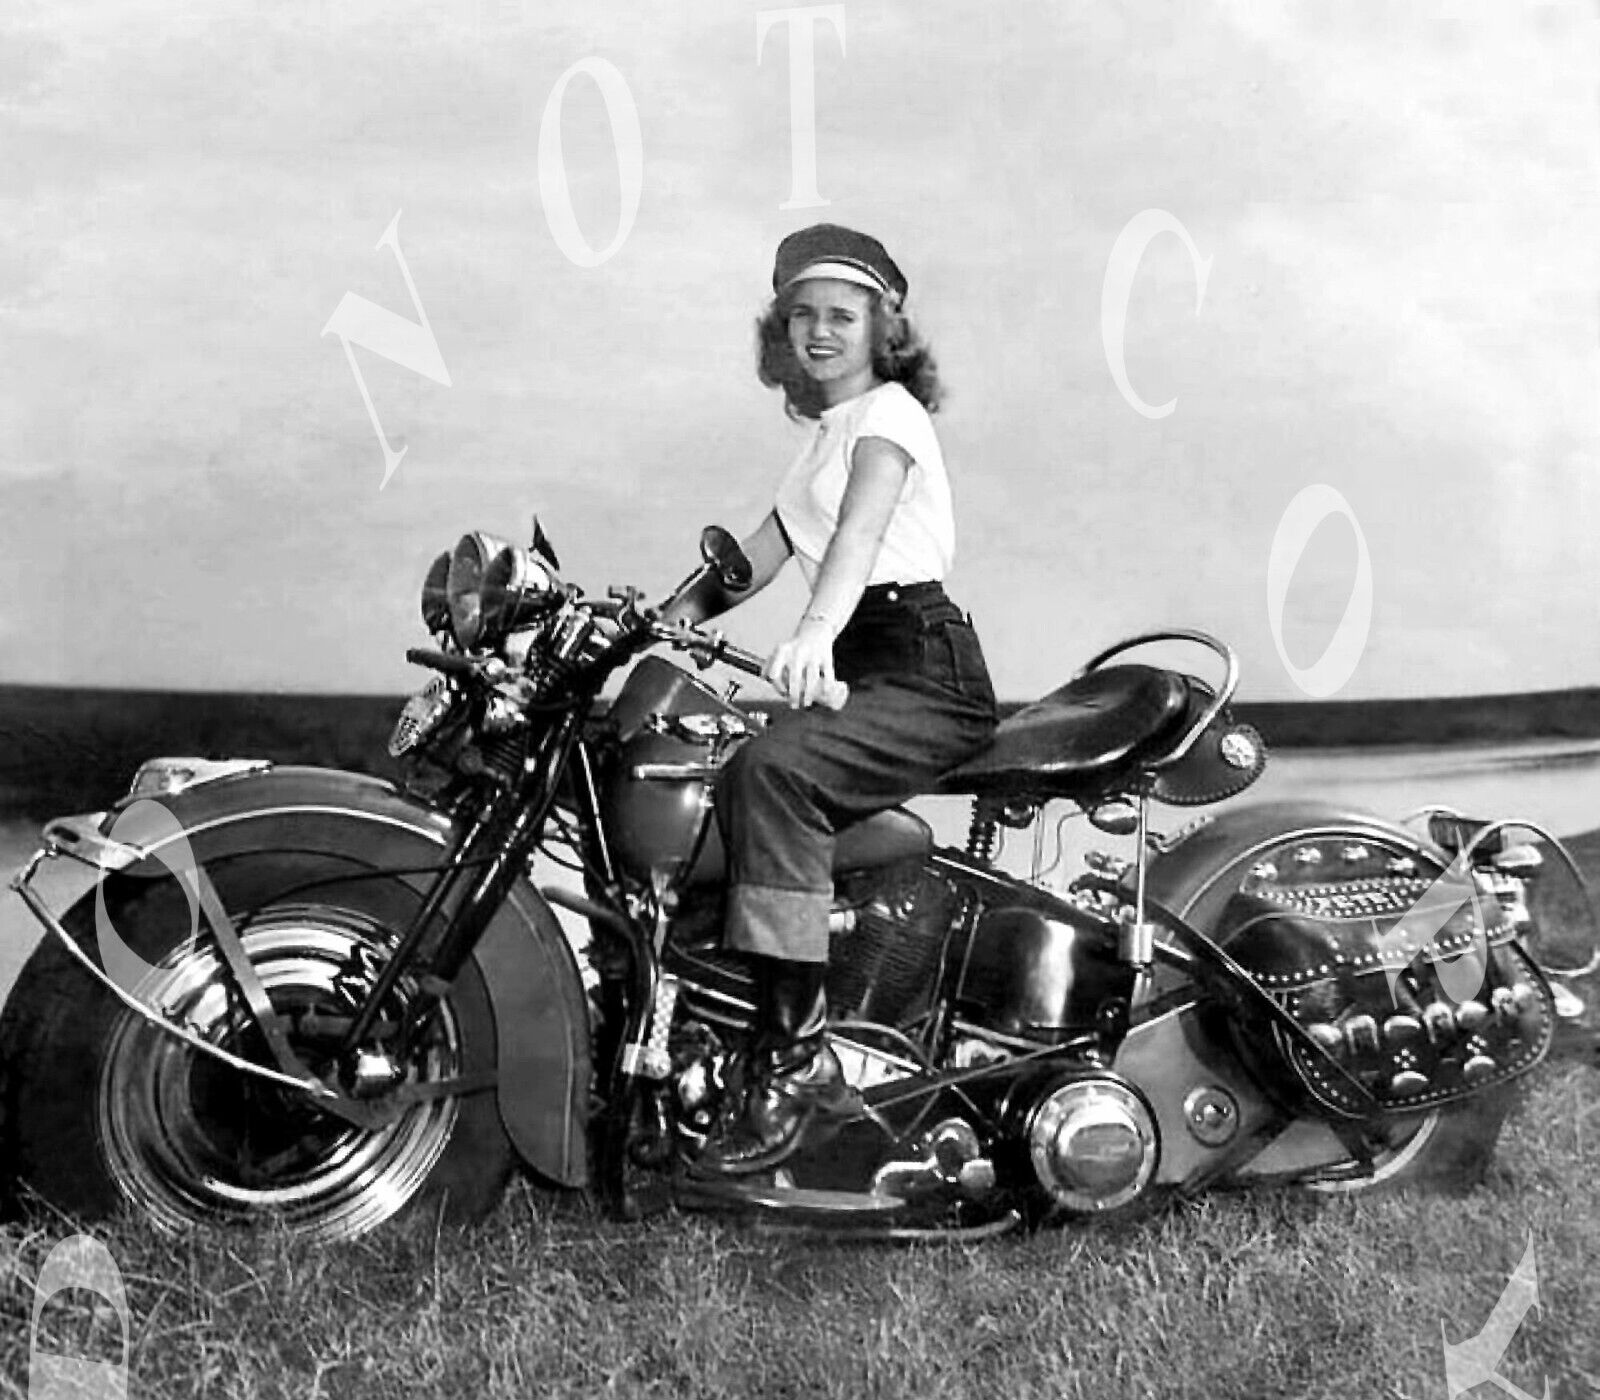 ANTIQUE REPRO 8X10 PHOTO PRETTY WOMAN ON HER HARLEY DAVIDSON MOTORCYCLE # 12